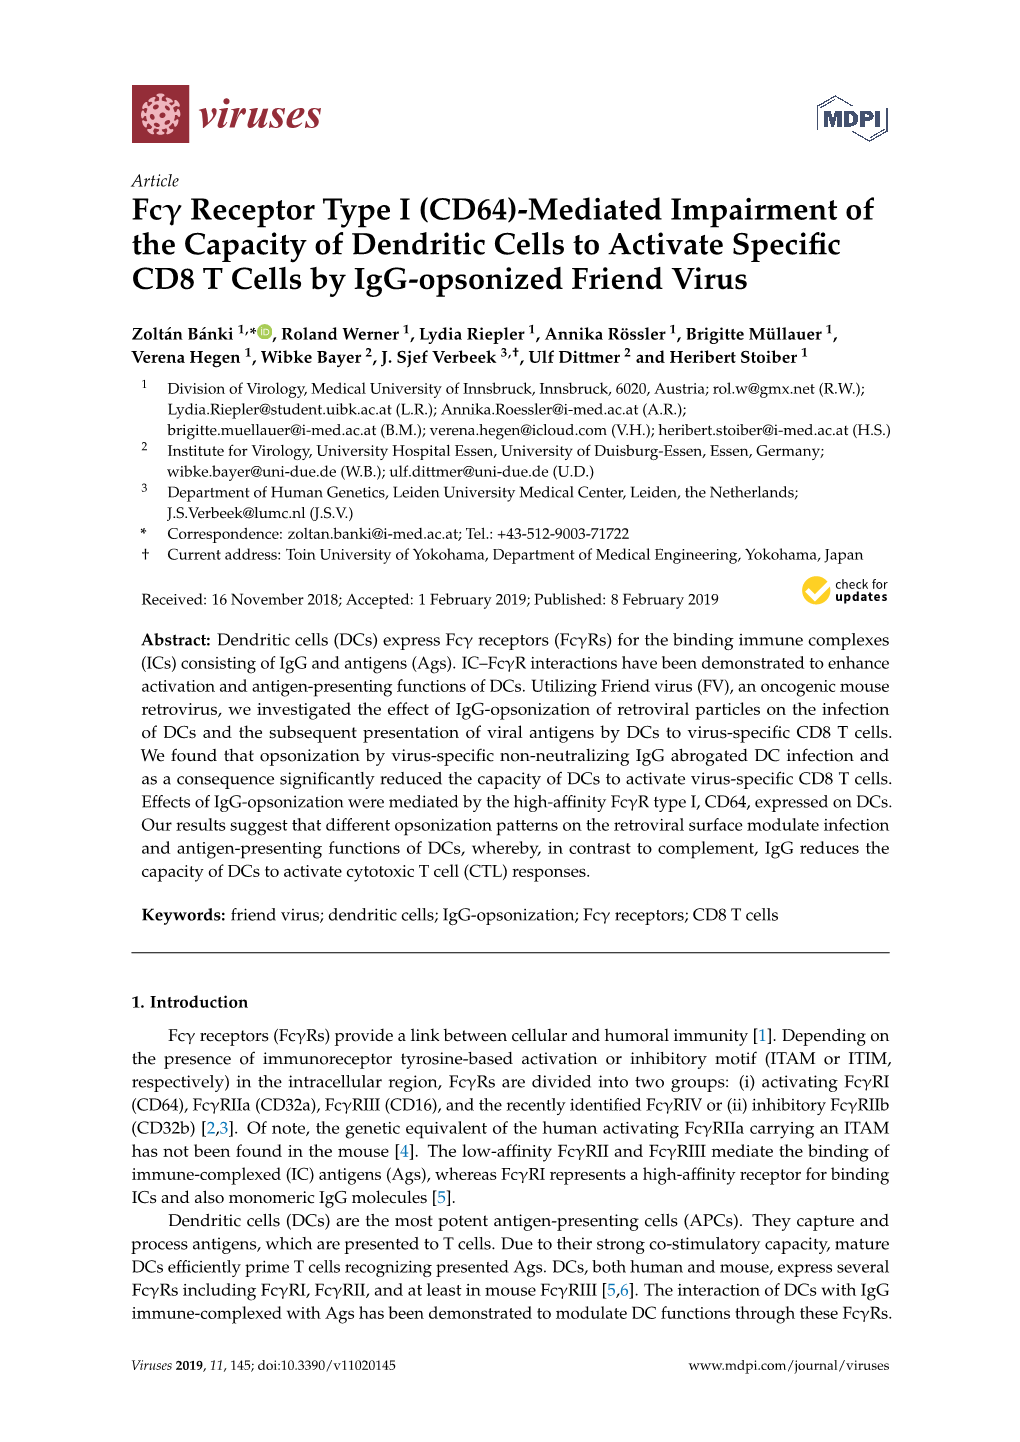 (CD64)-Mediated Impairment of the Capacity of Dendritic Cells to Activate Speciﬁc CD8 T Cells by Igg-Opsonized Friend Virus